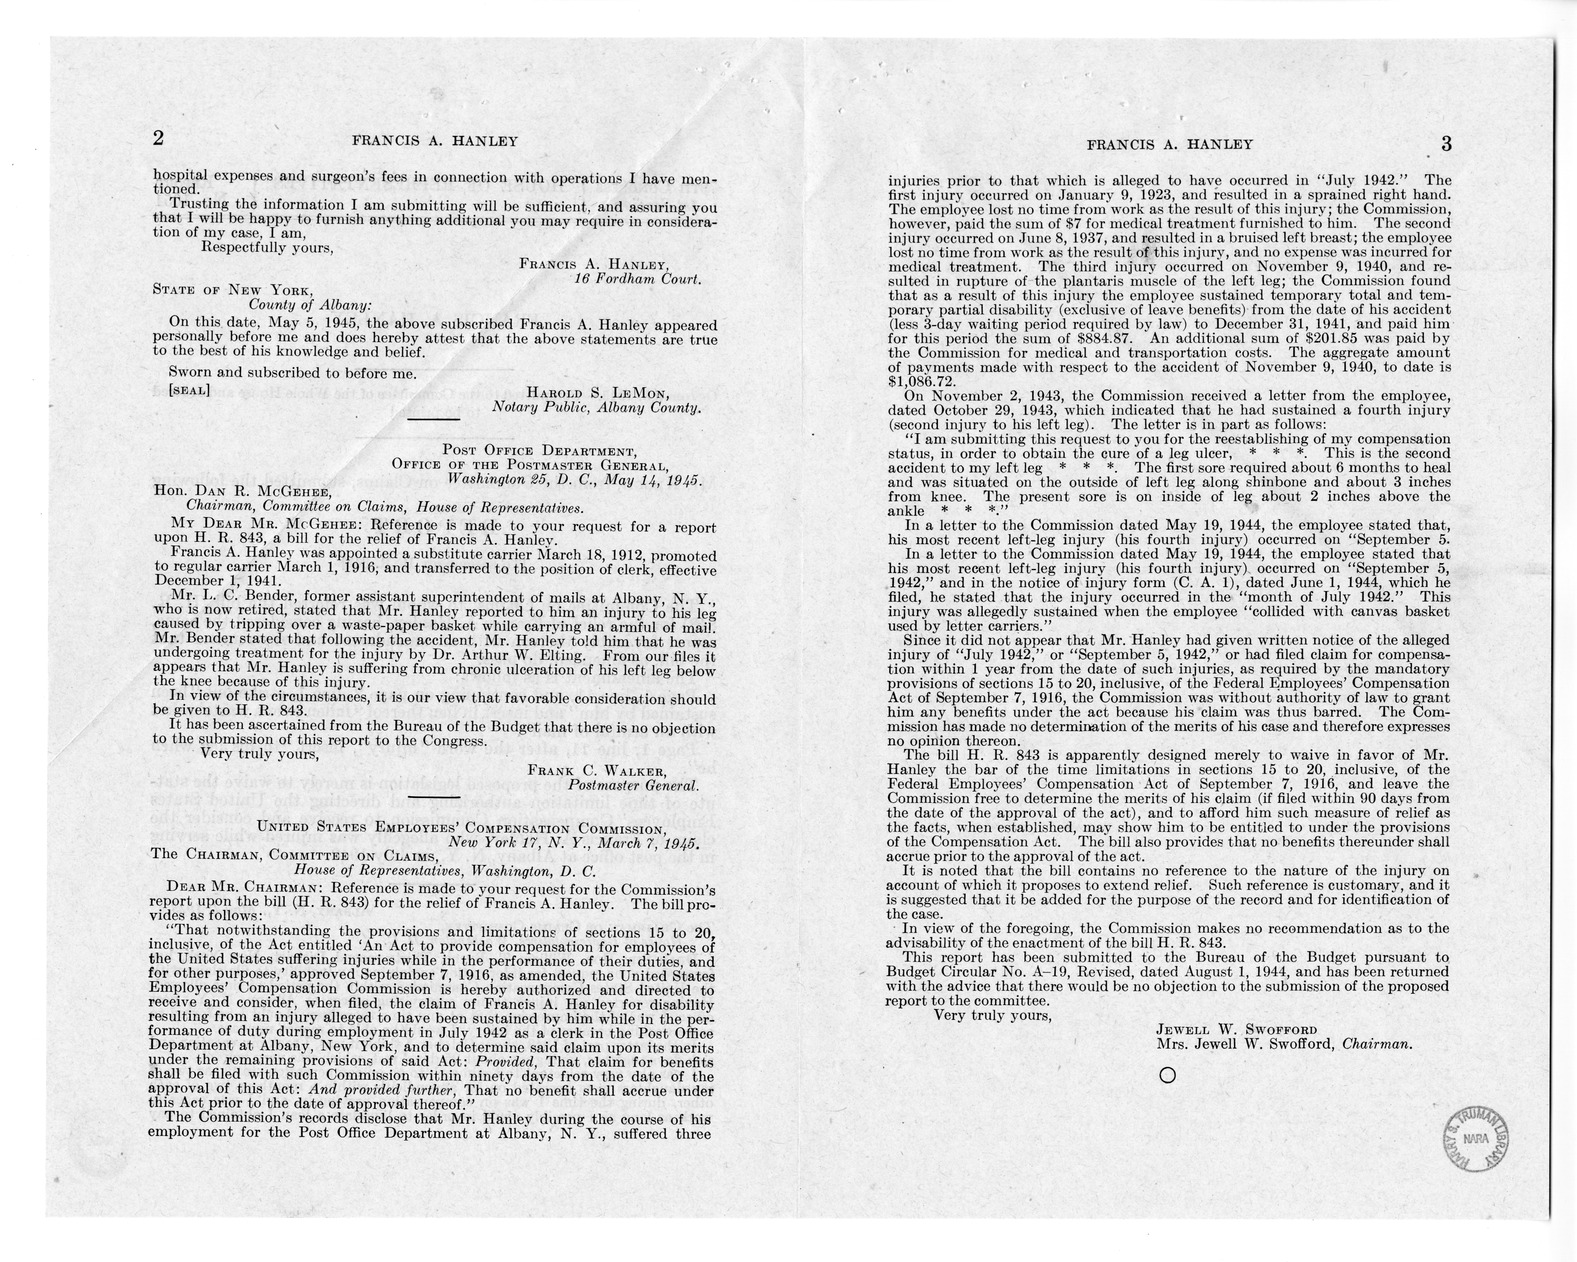 Memorandum from Frederick J. Bailey to M. C. Latta, H.R. 843, For the Relief of Francis A. Hanley, with Attachments